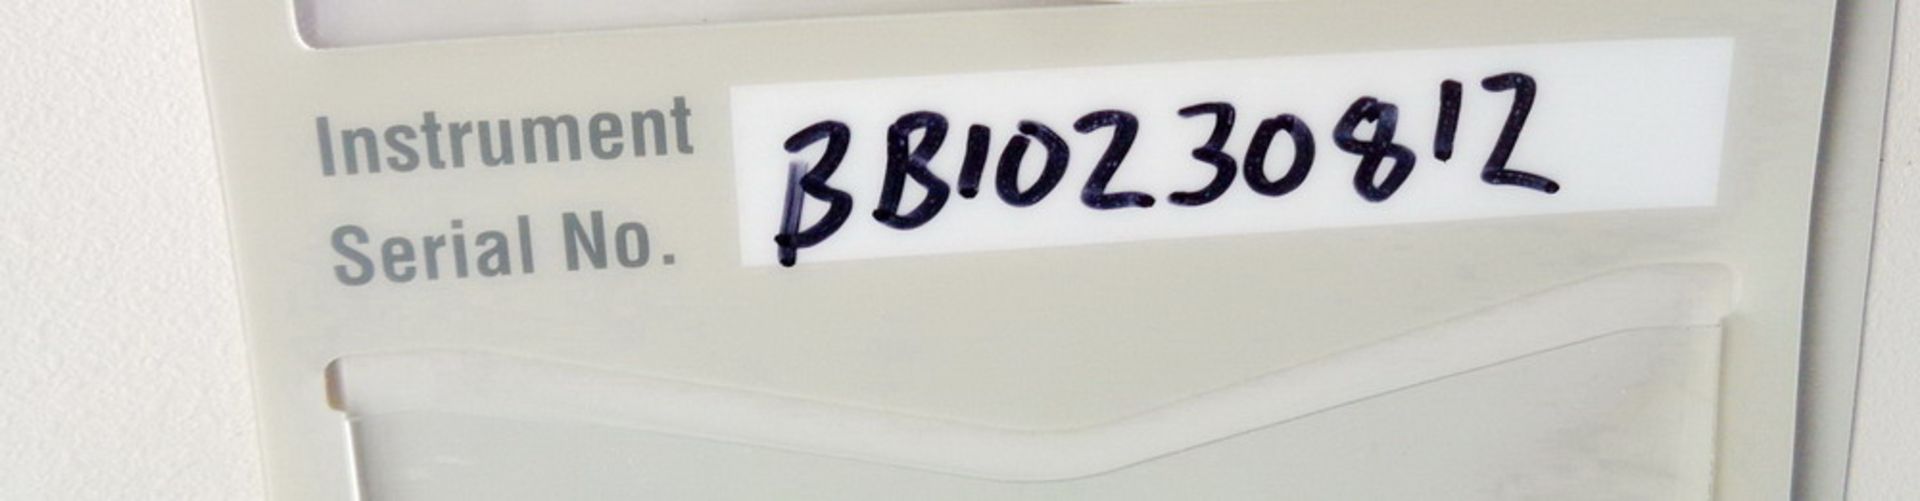 AB Applied Biosystems / MDS Sciex Triple Quad 5500 Trap LC/MS/MS System, S/N BB10230812 - Image 7 of 9